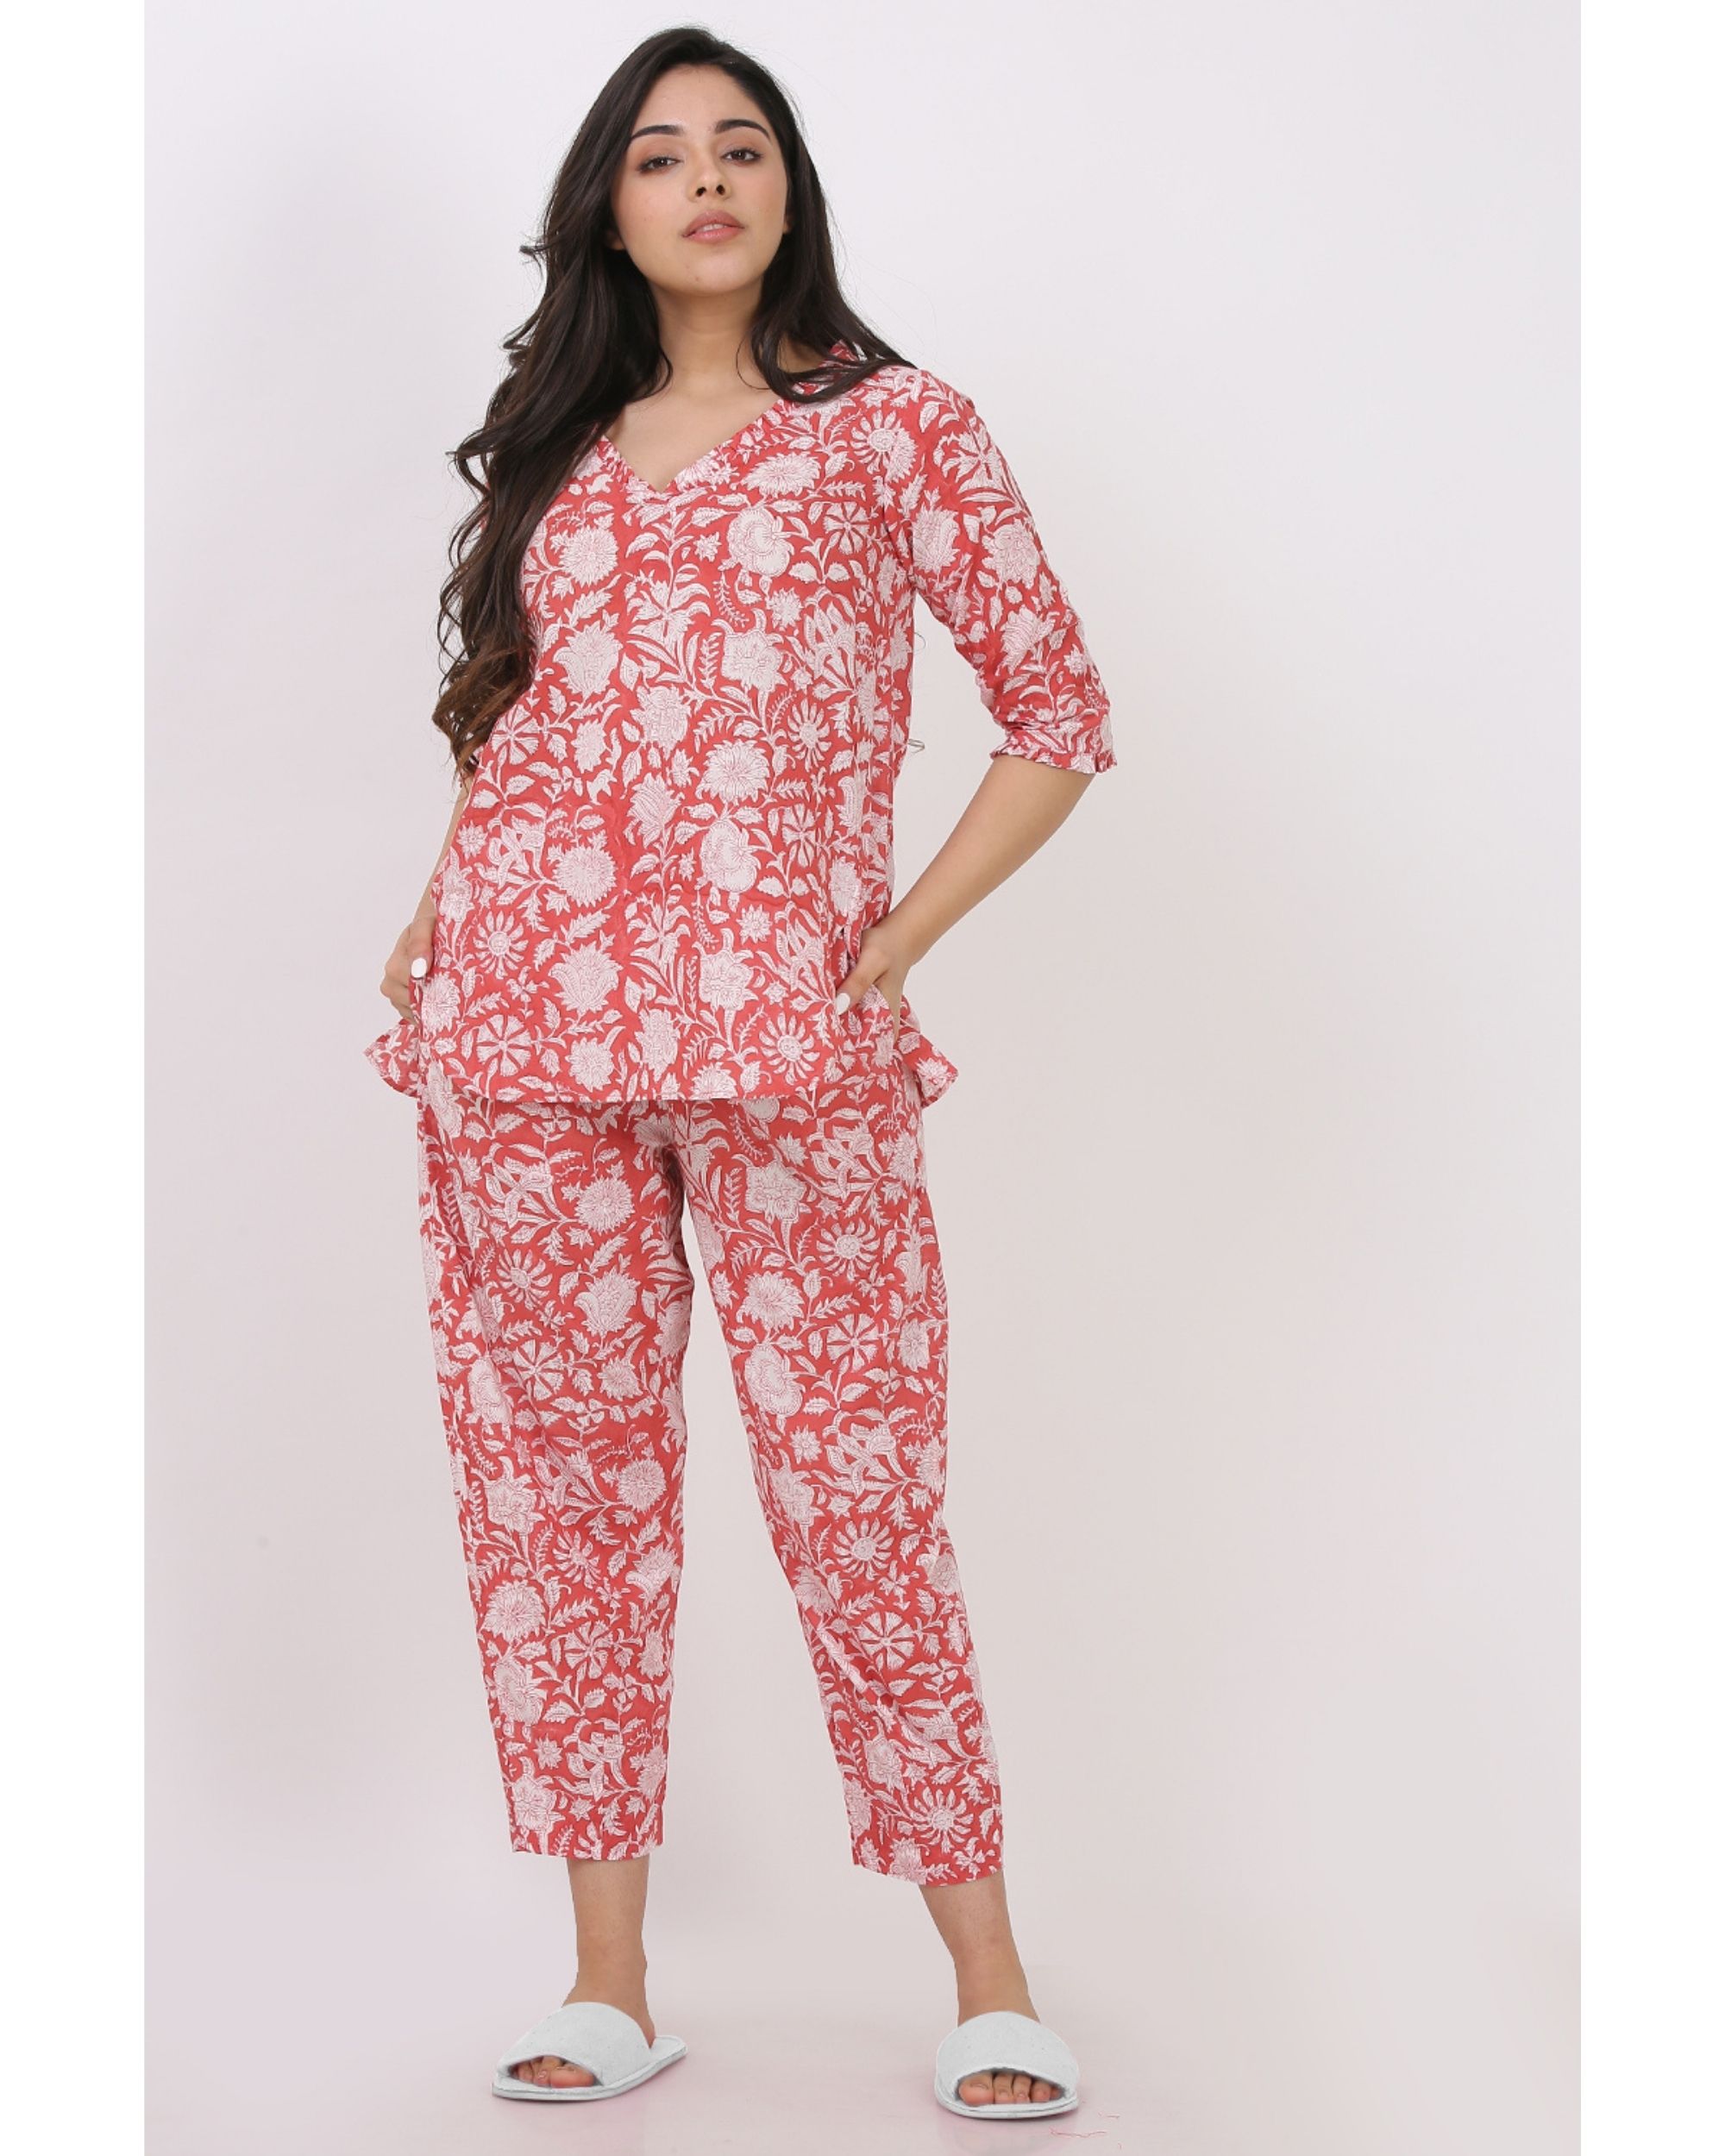 Coral pink floral printed top with pants - set of two